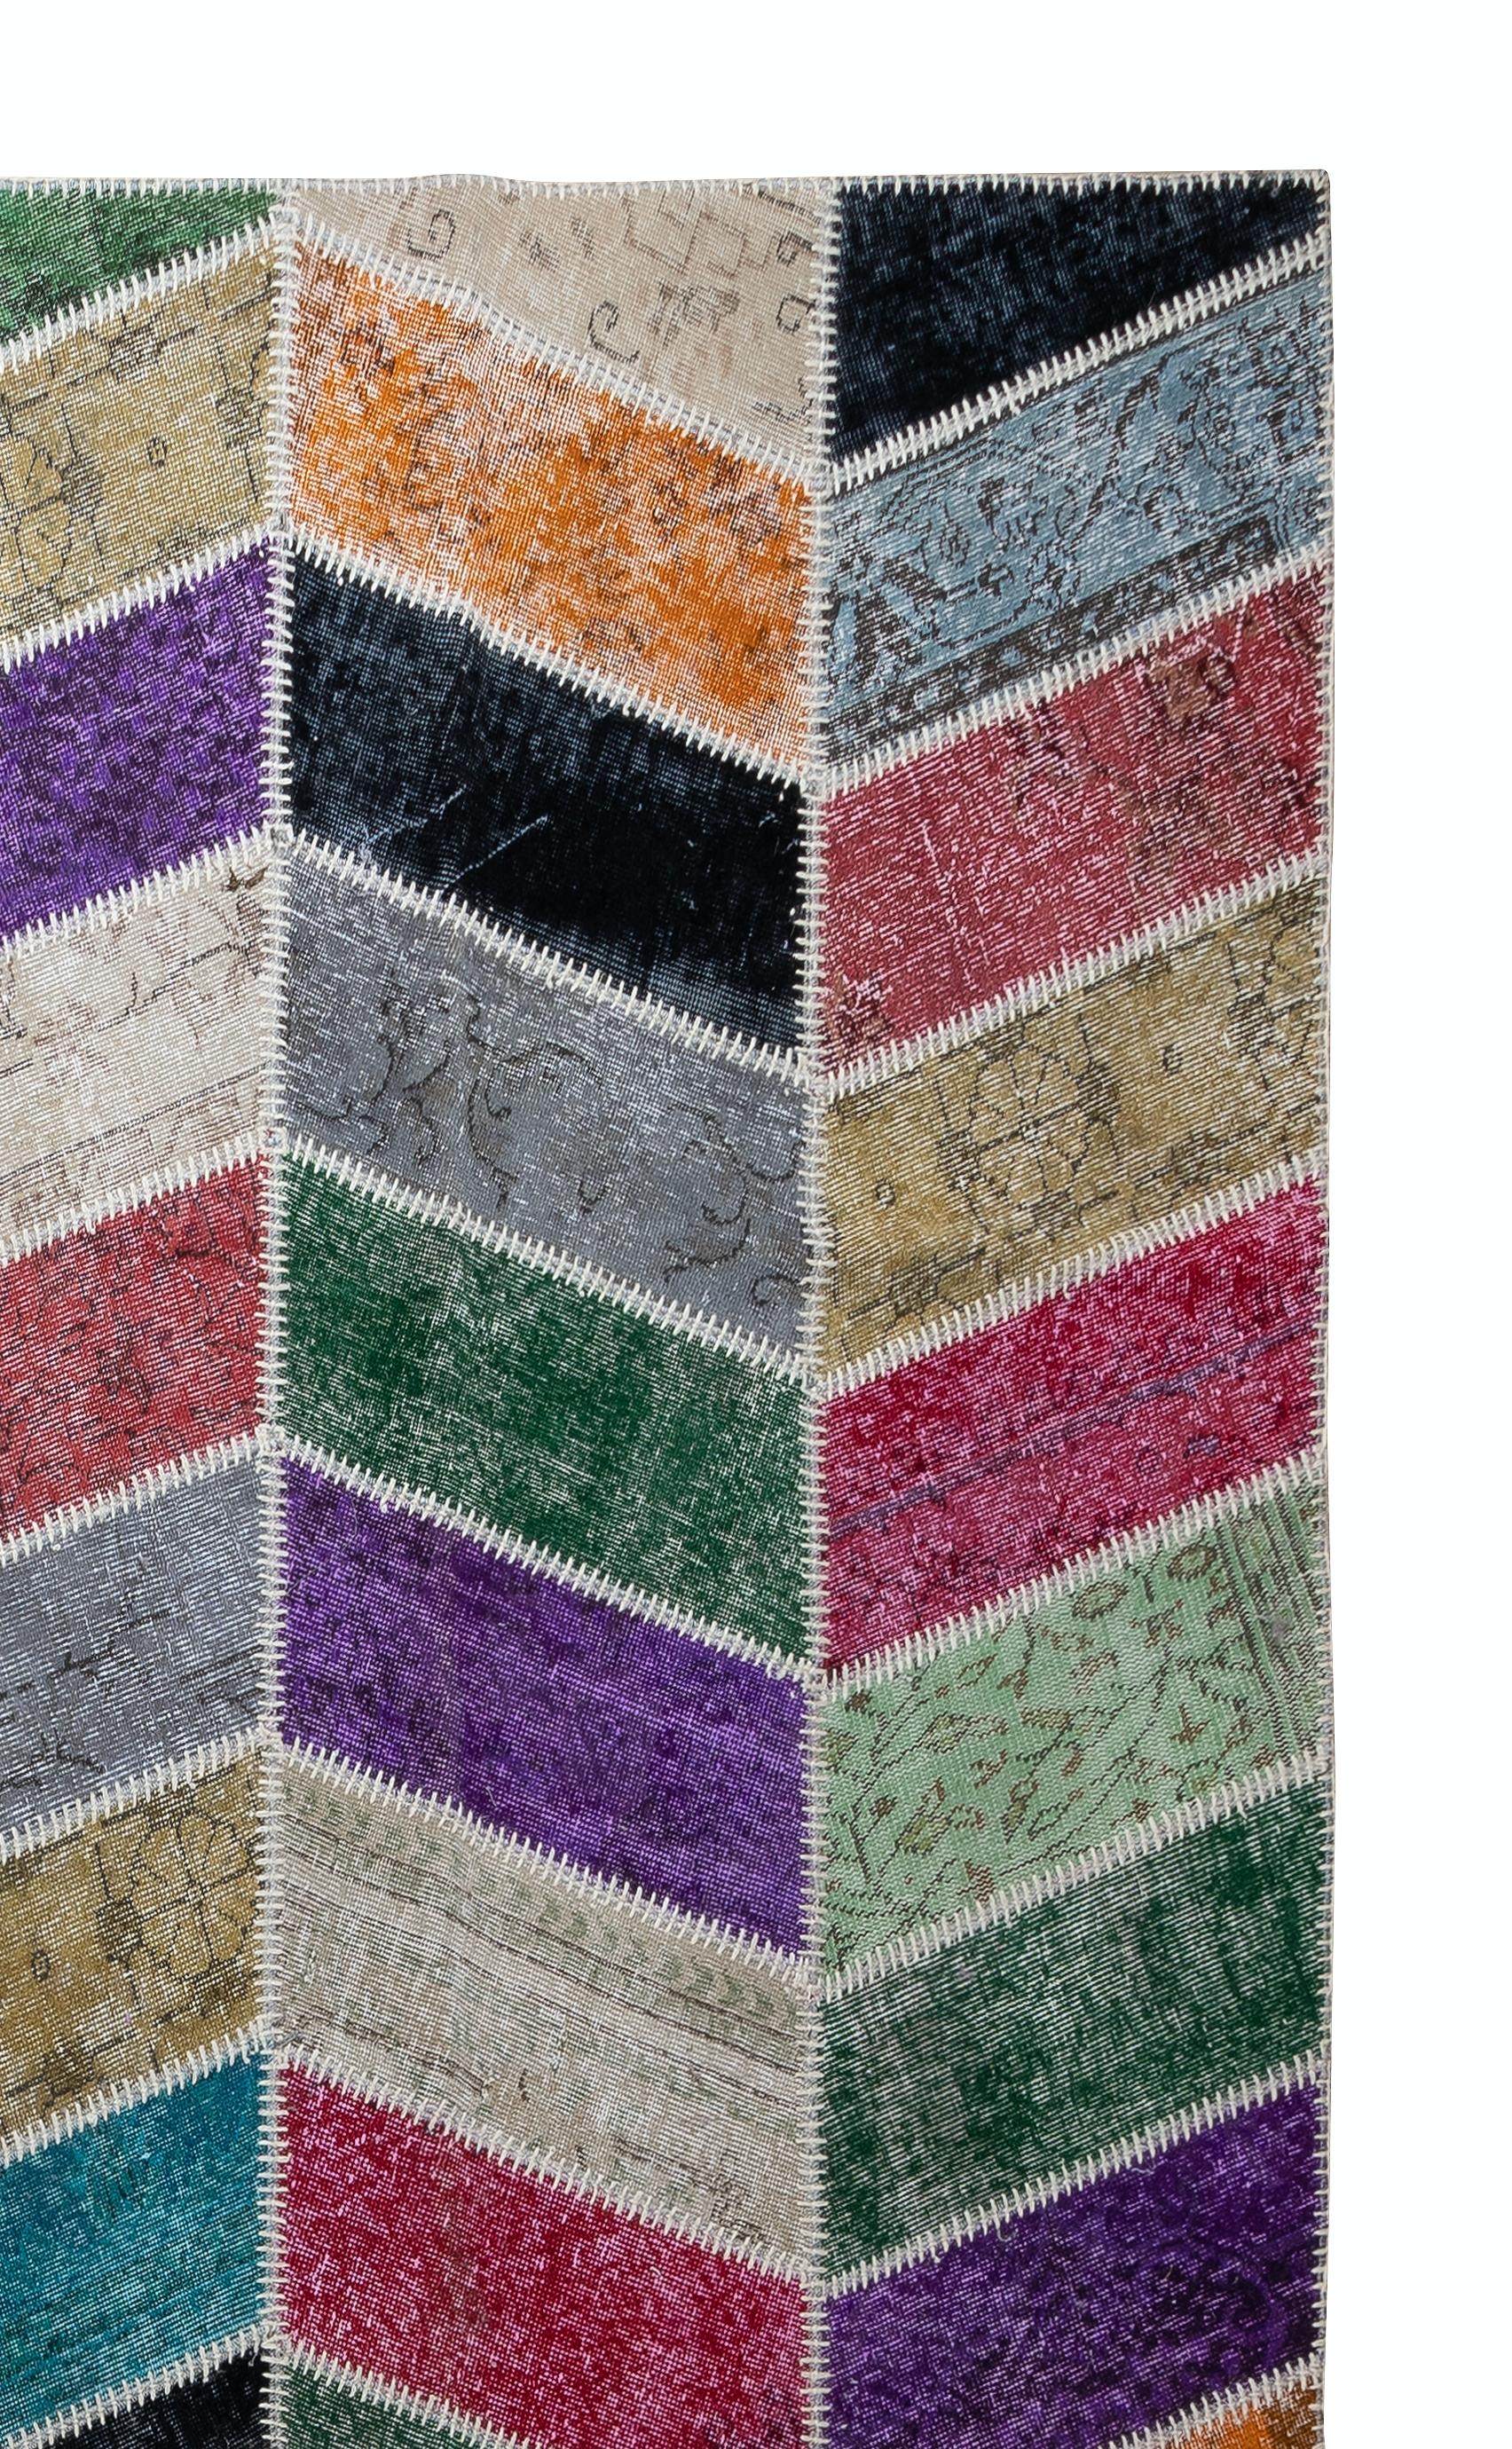 Hand-Knotted Vibrant Handmade Patchwork Rug. Modern Look Colorful Carpet. Custom Options Ava. For Sale